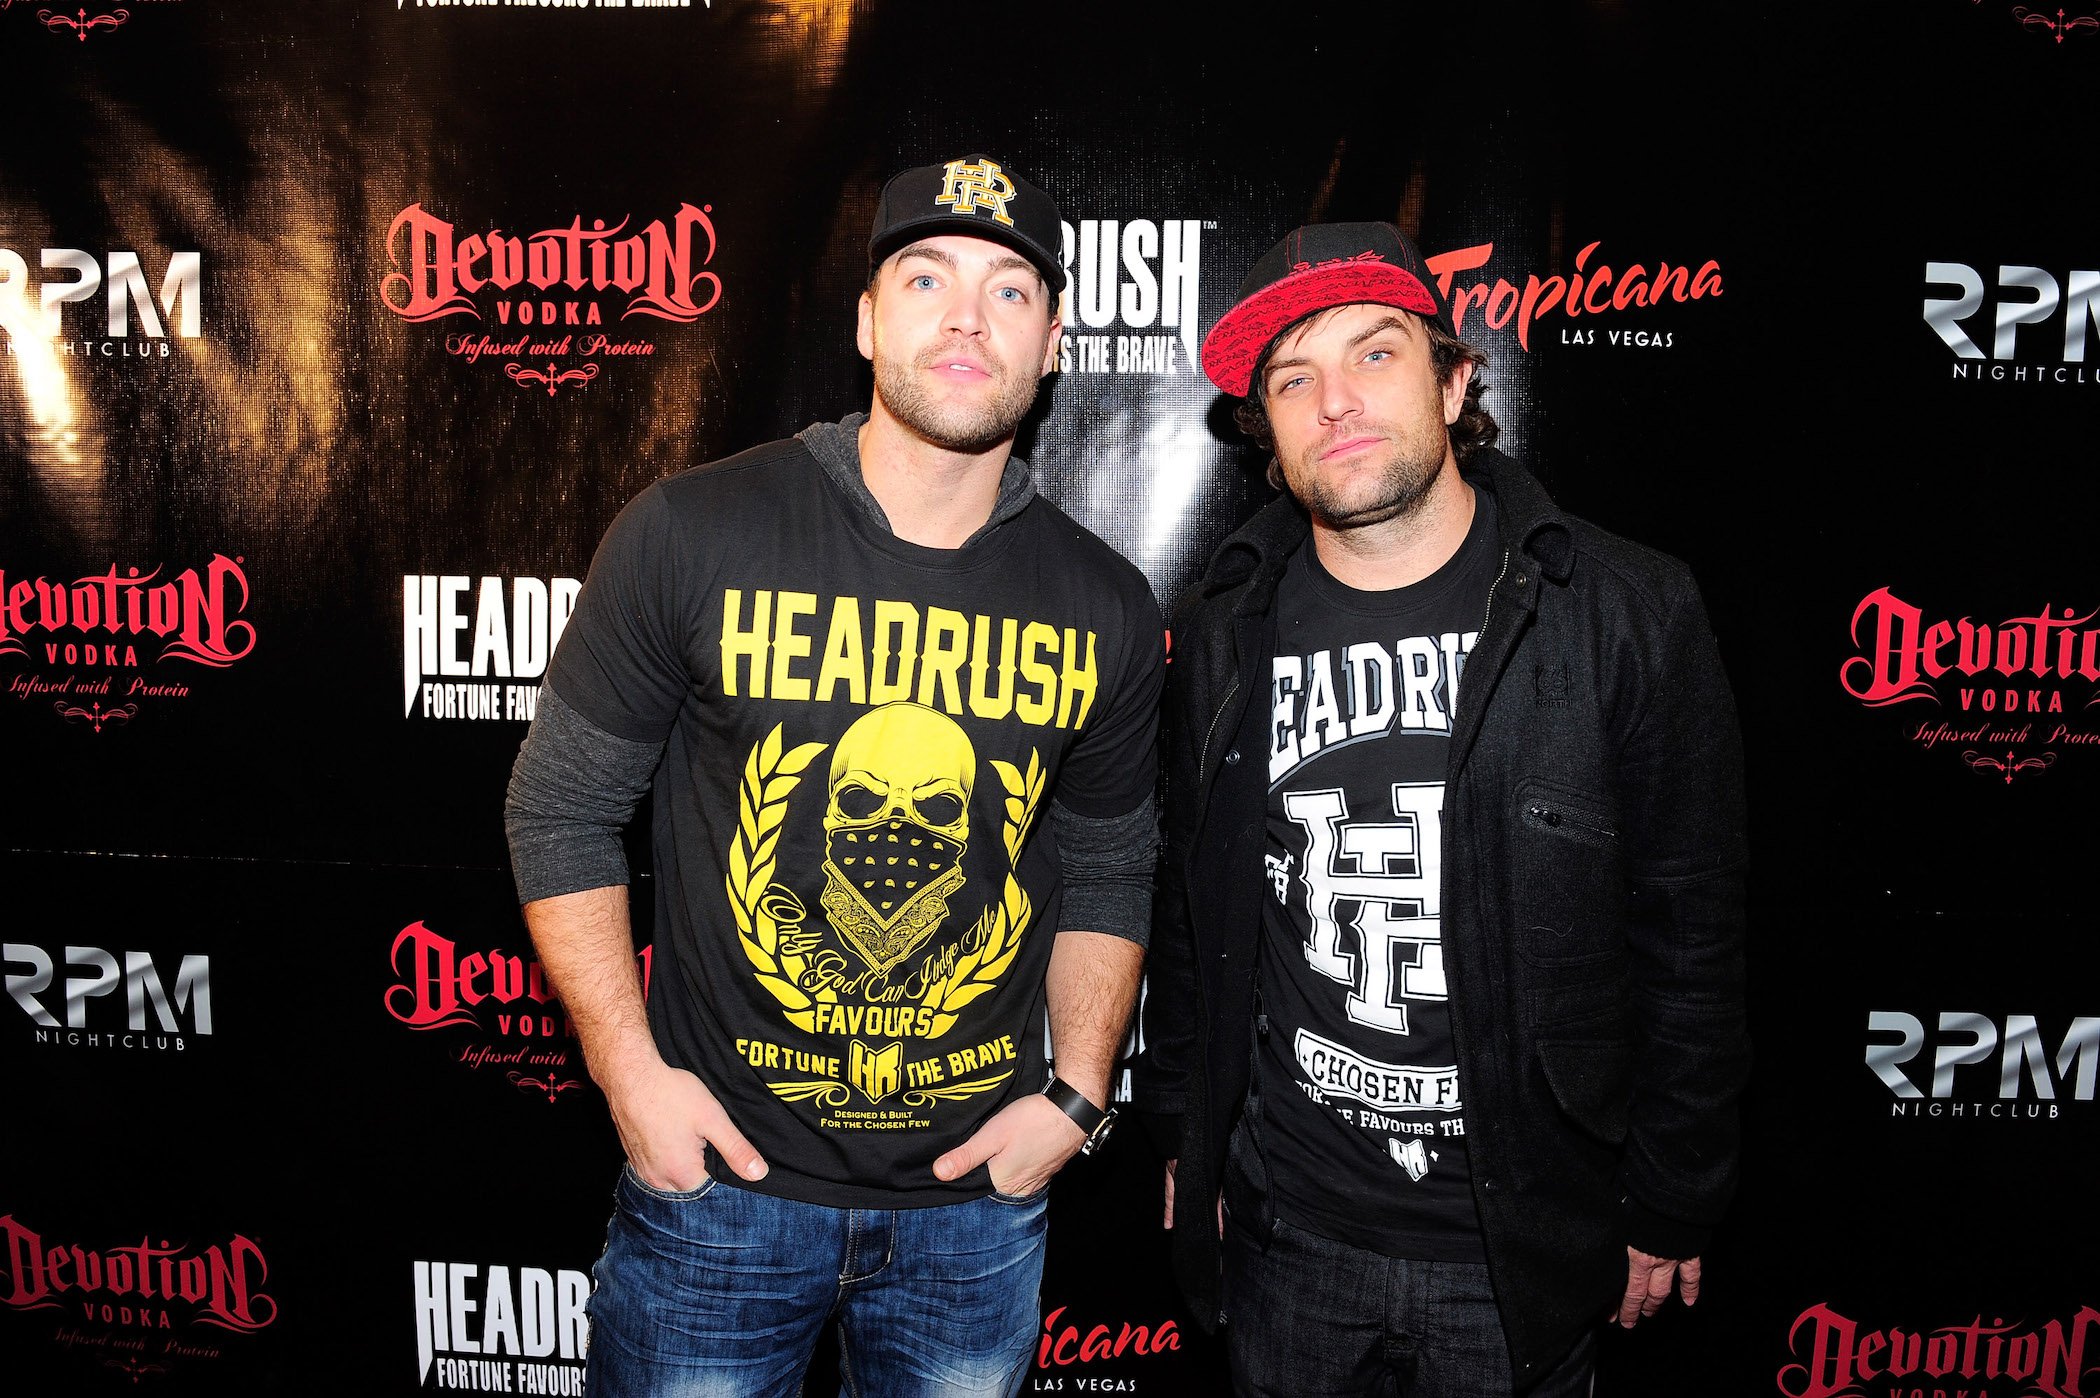 CT Tamburello and T.J. Lavin from MTV's 'The Challenge' standing together at an event